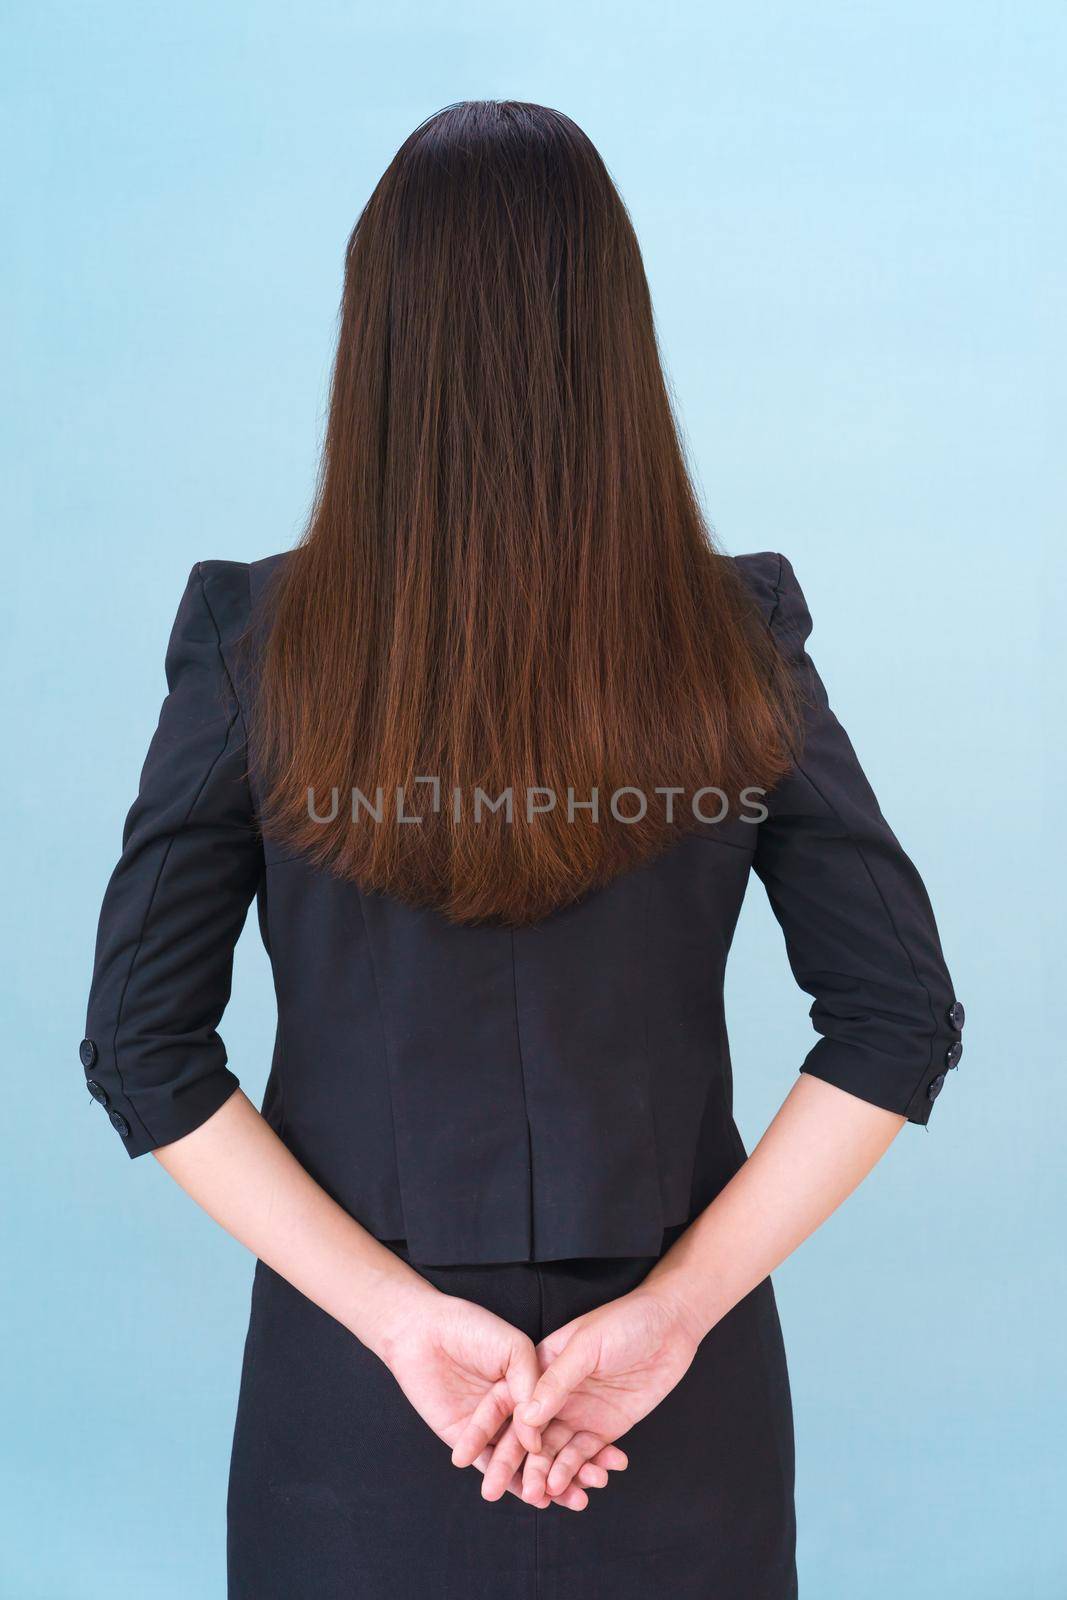 Women in suit from behind agent blue background by stoonn